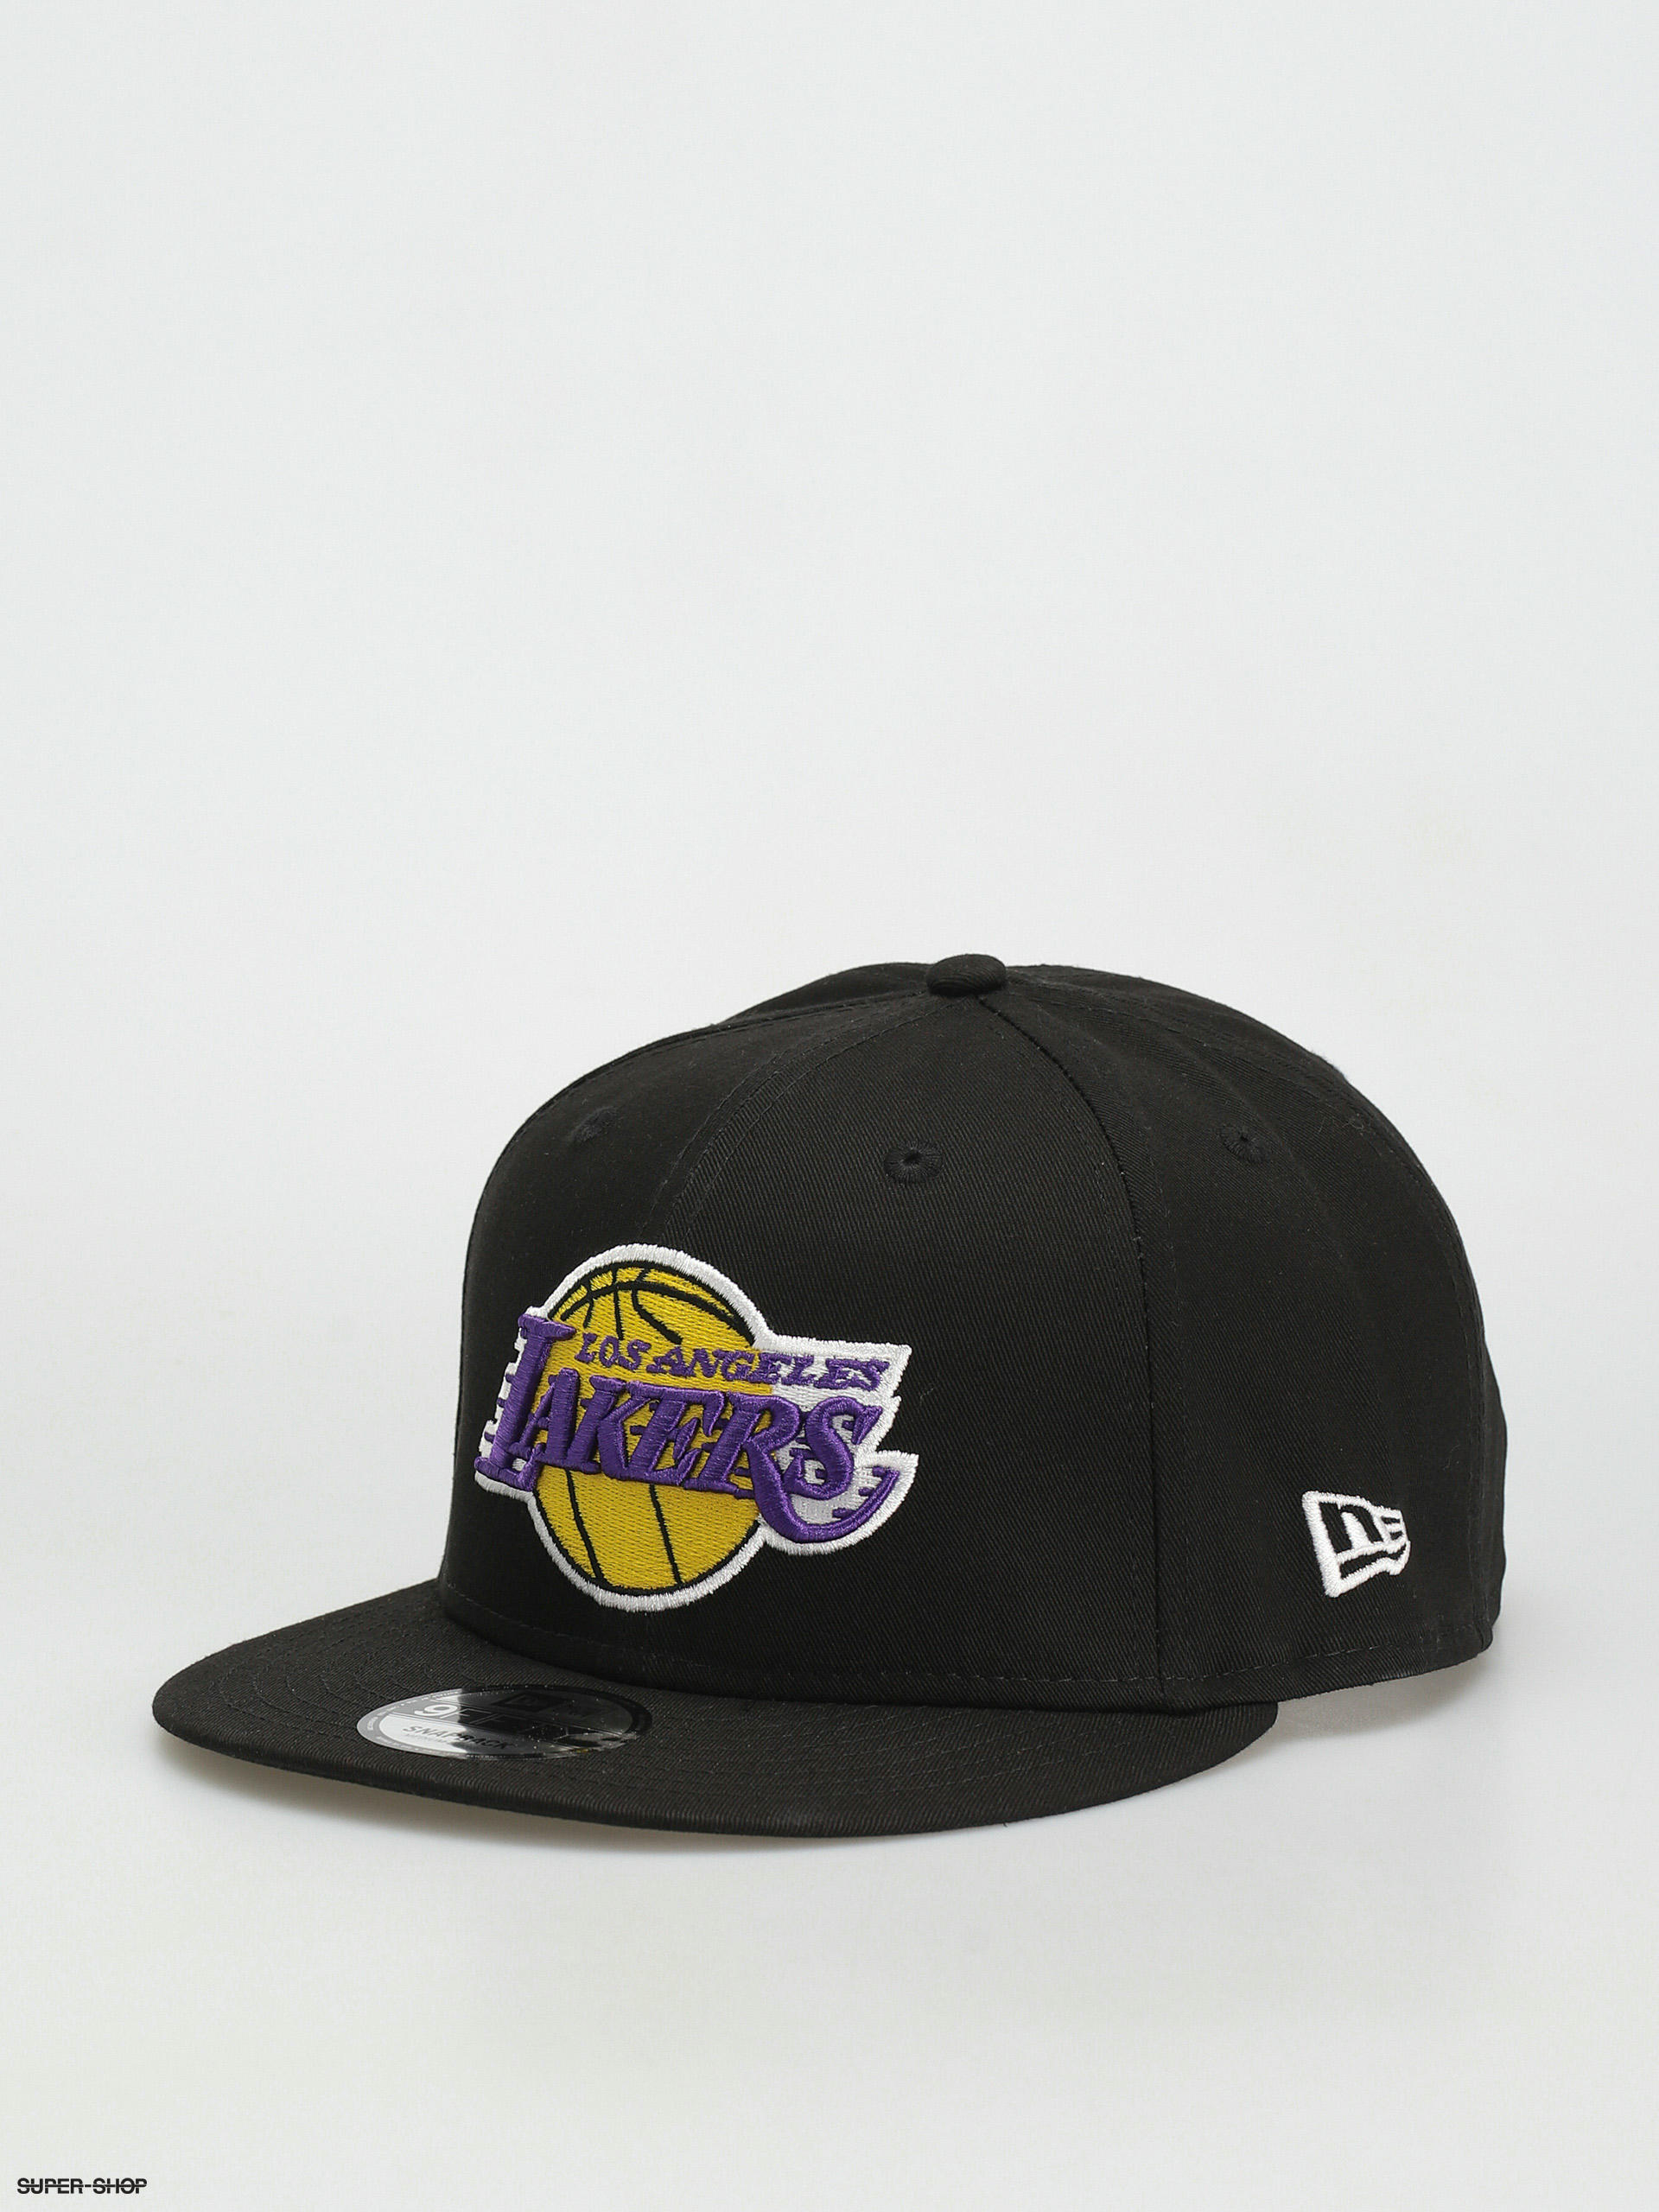 Los Angeles Lakers Hats, Lakers Snapbacks, Fitted Hats, Beanies